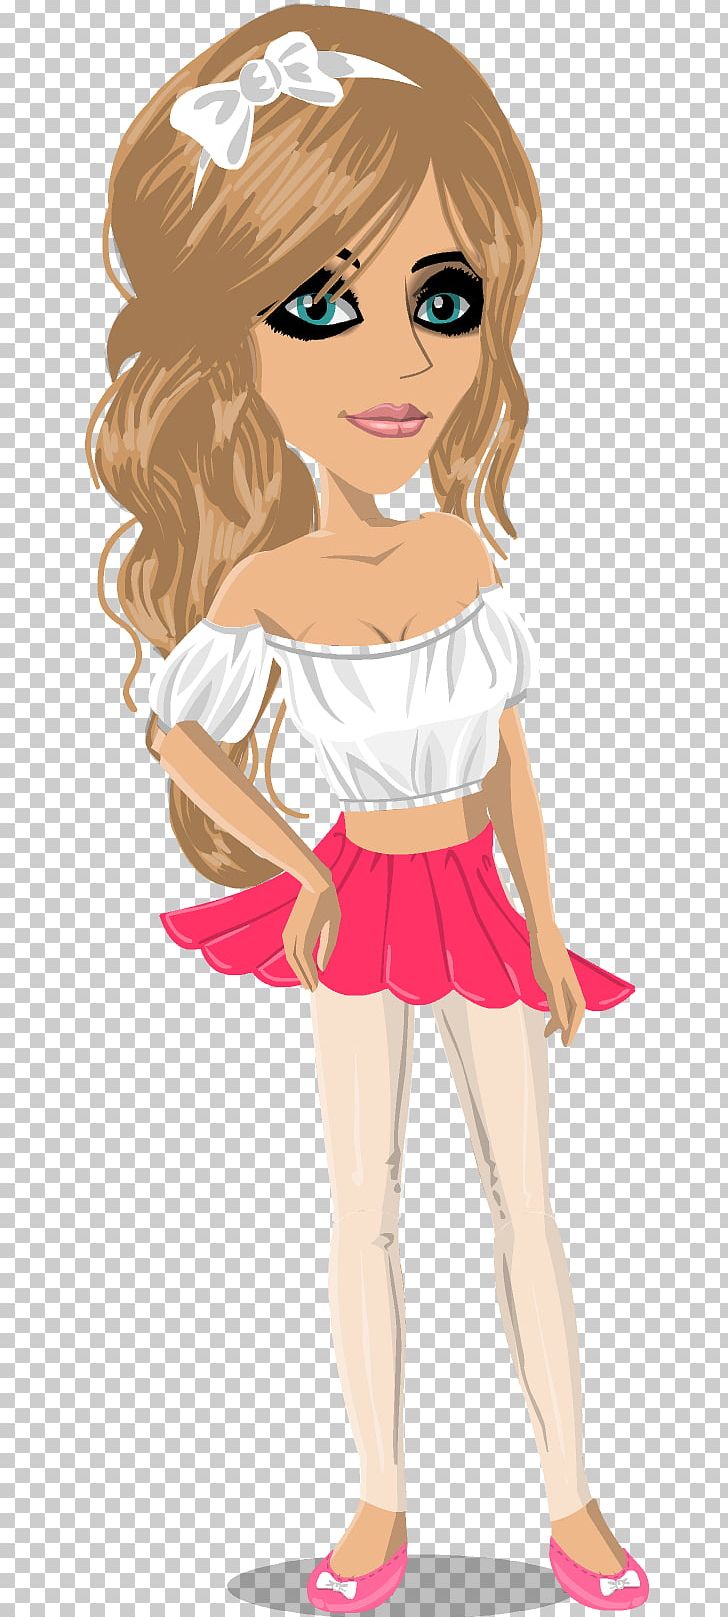 MovieStarPlanet Link Wiki User The Legend Of Zelda PNG, Clipart, Anime, Arm, Art, Barbie, Brown Hair Free PNG Download